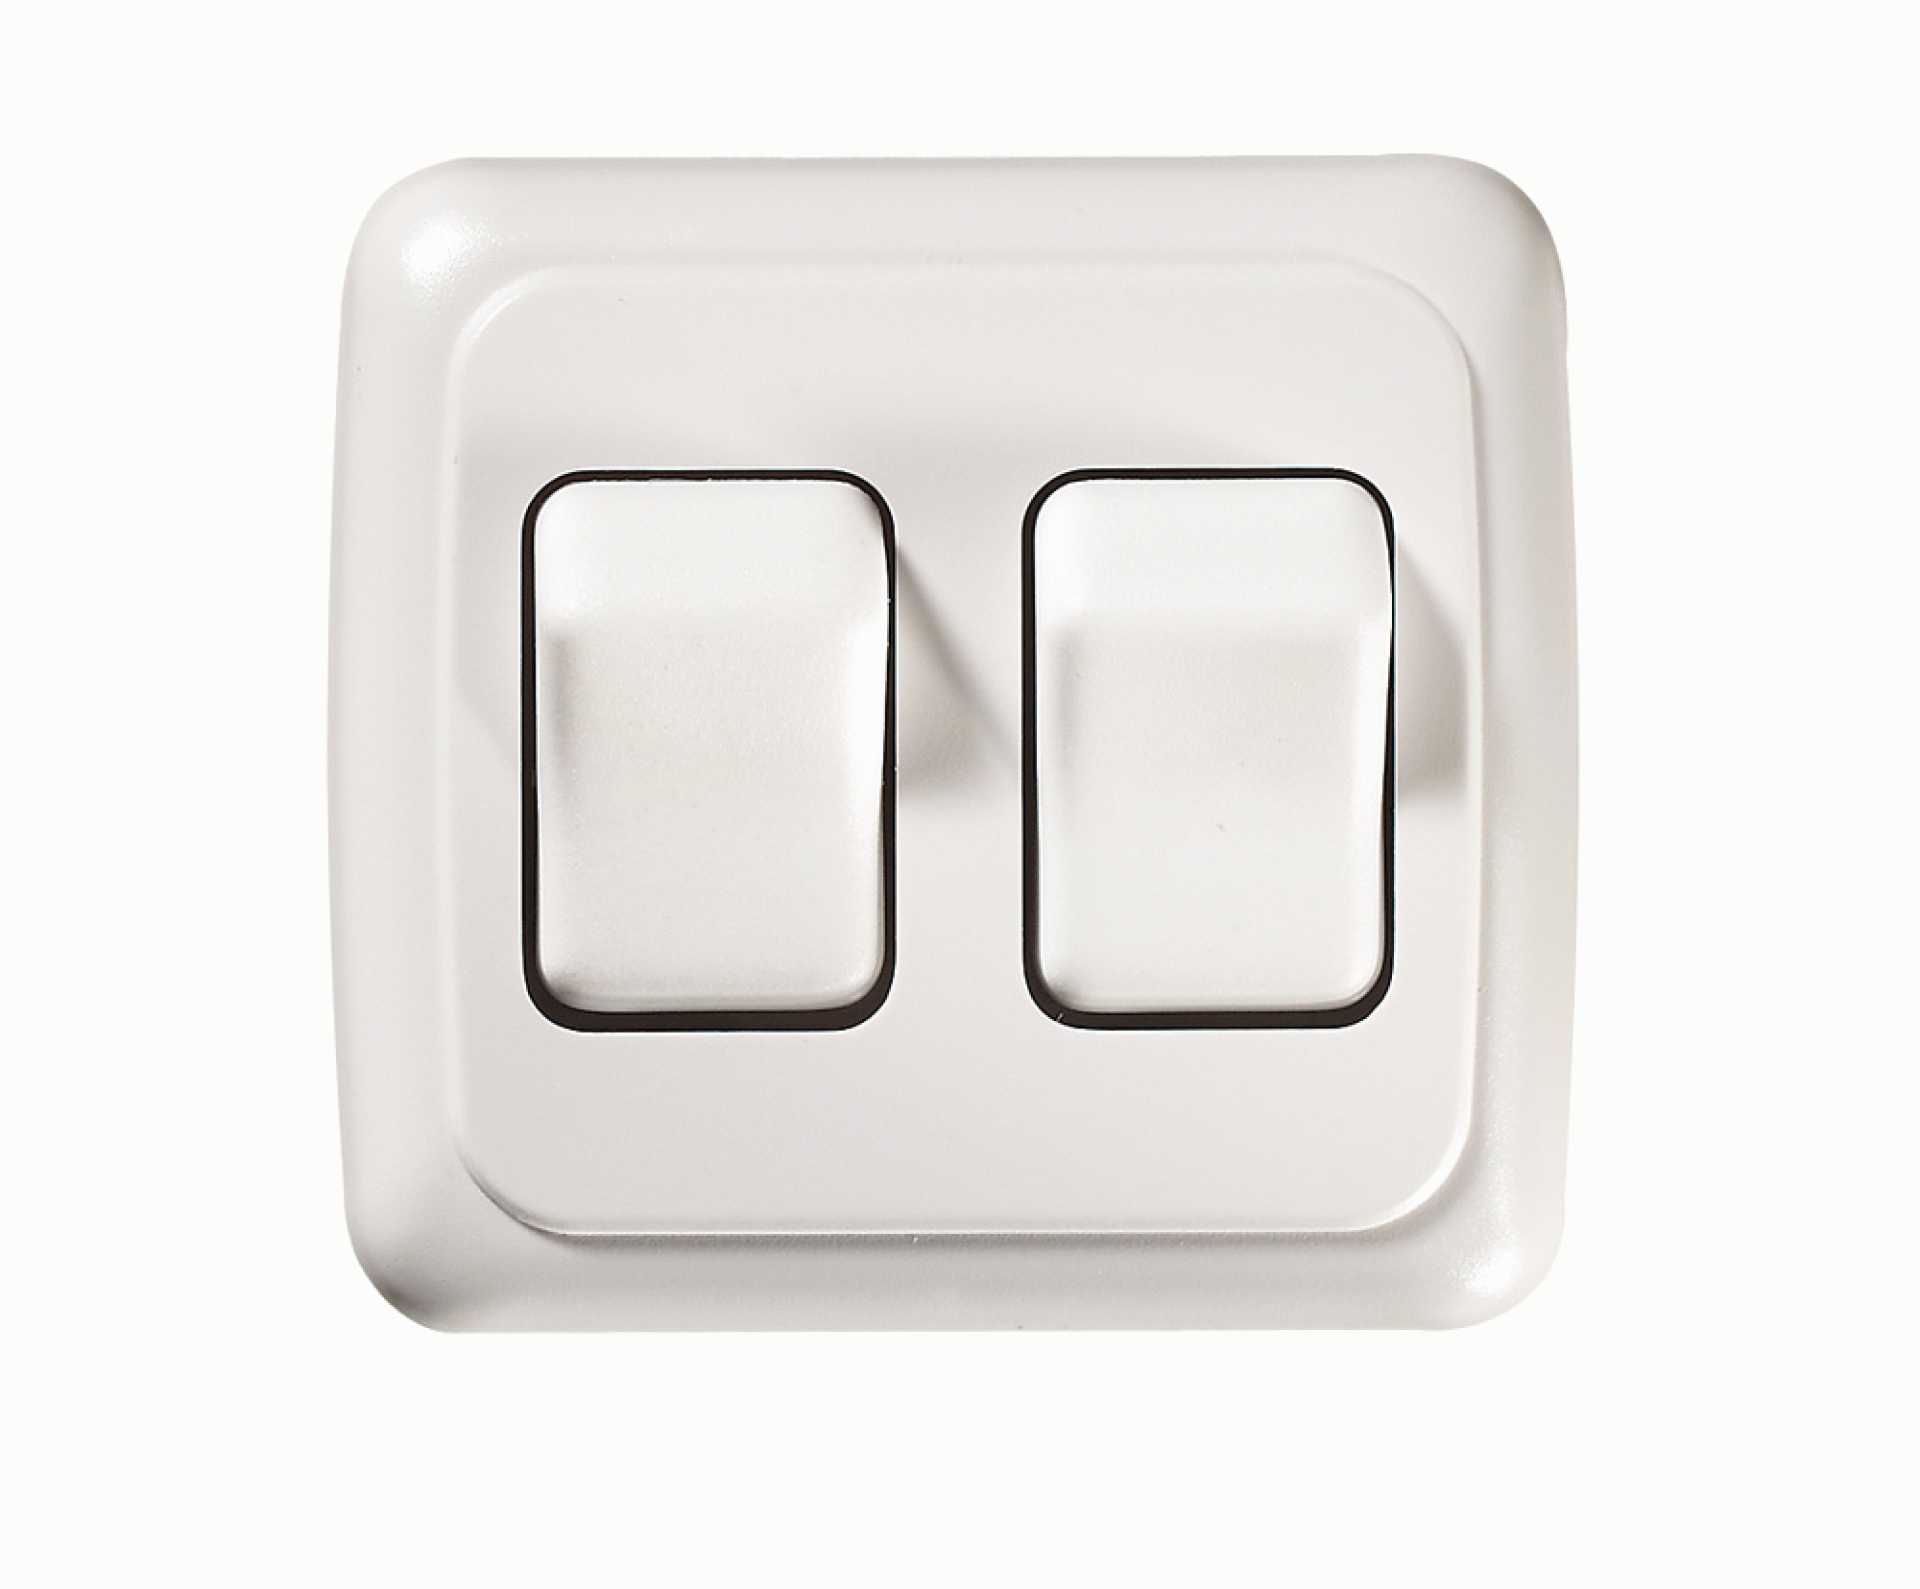 RV DESIGNER COLLECTION | S533 | Contoured Wall Switch White Double On/Off SPST